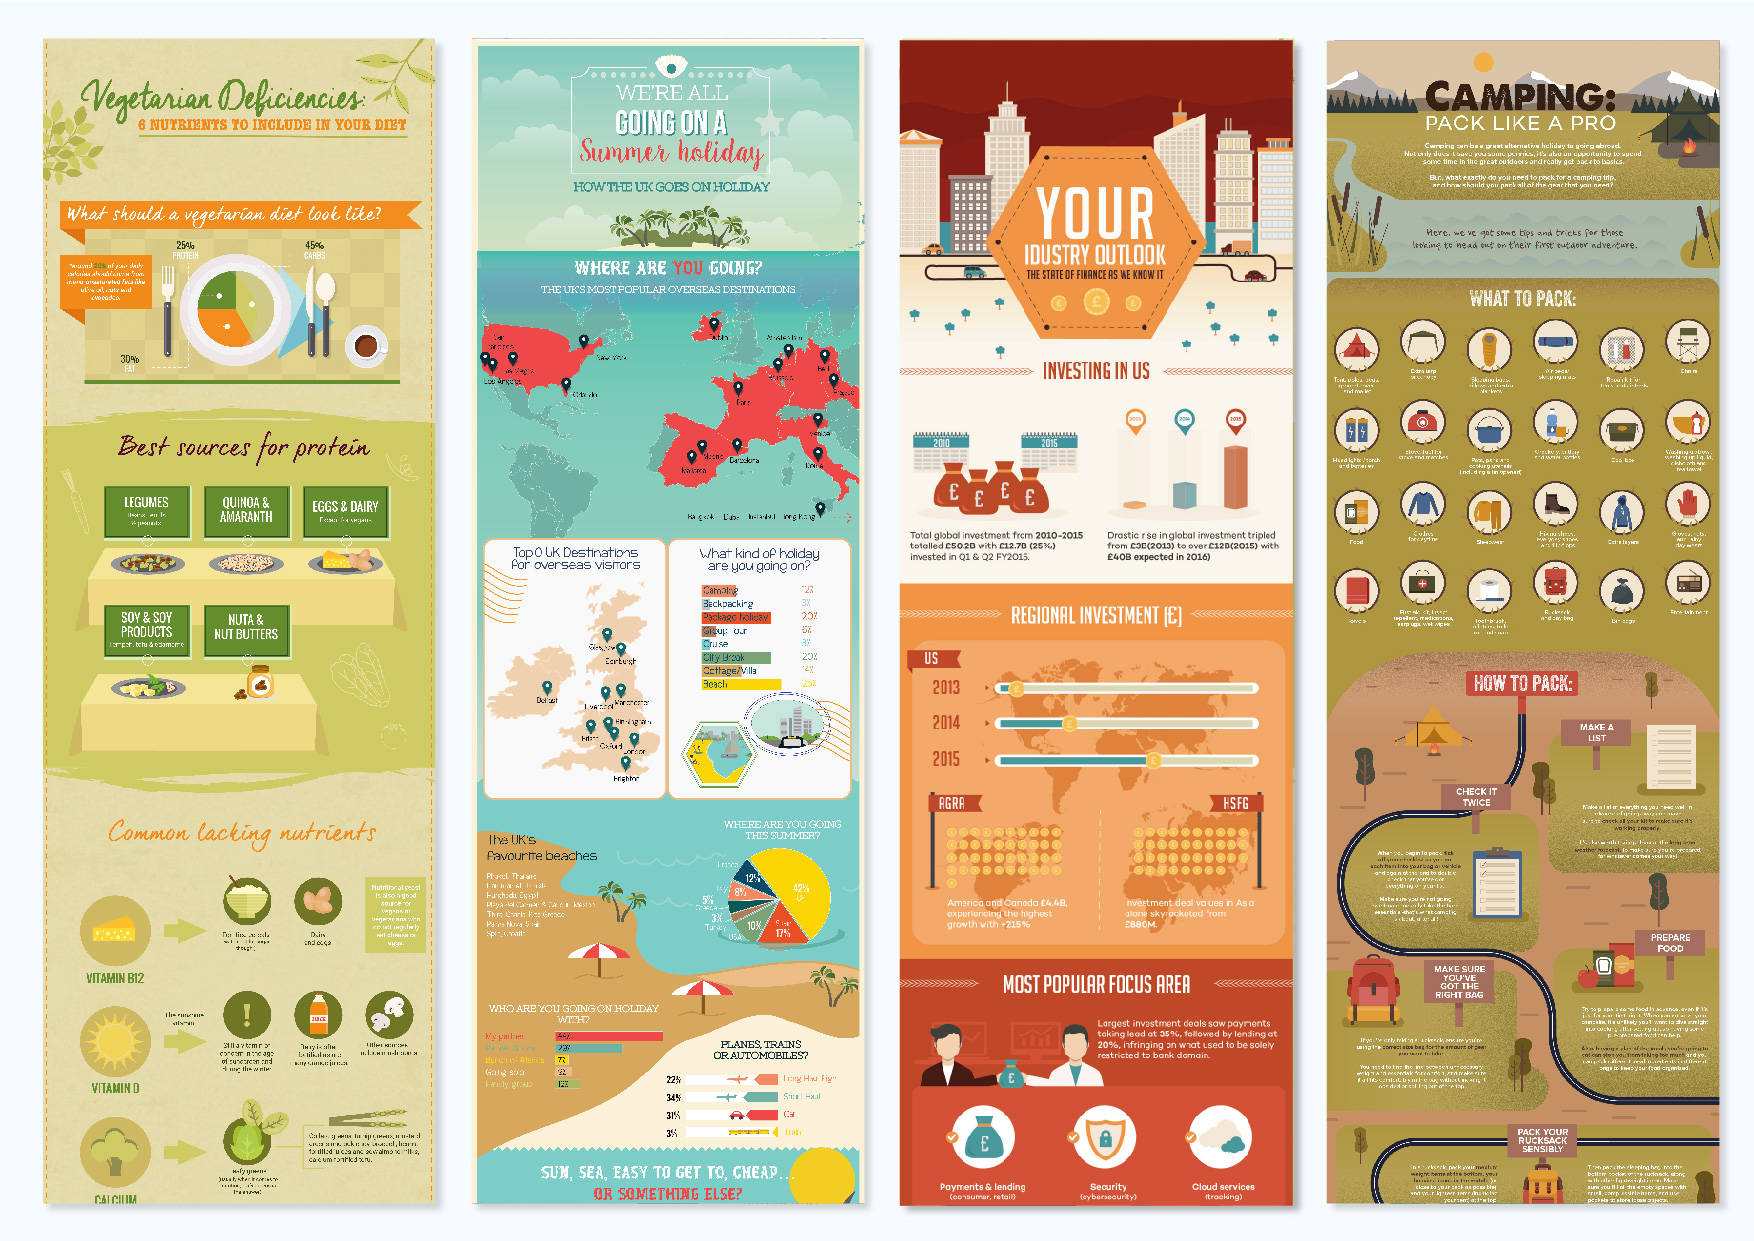 Webmasters Gallery20 Cool Infographic Templates to Create Amazing Designs | Webmasters Gallery